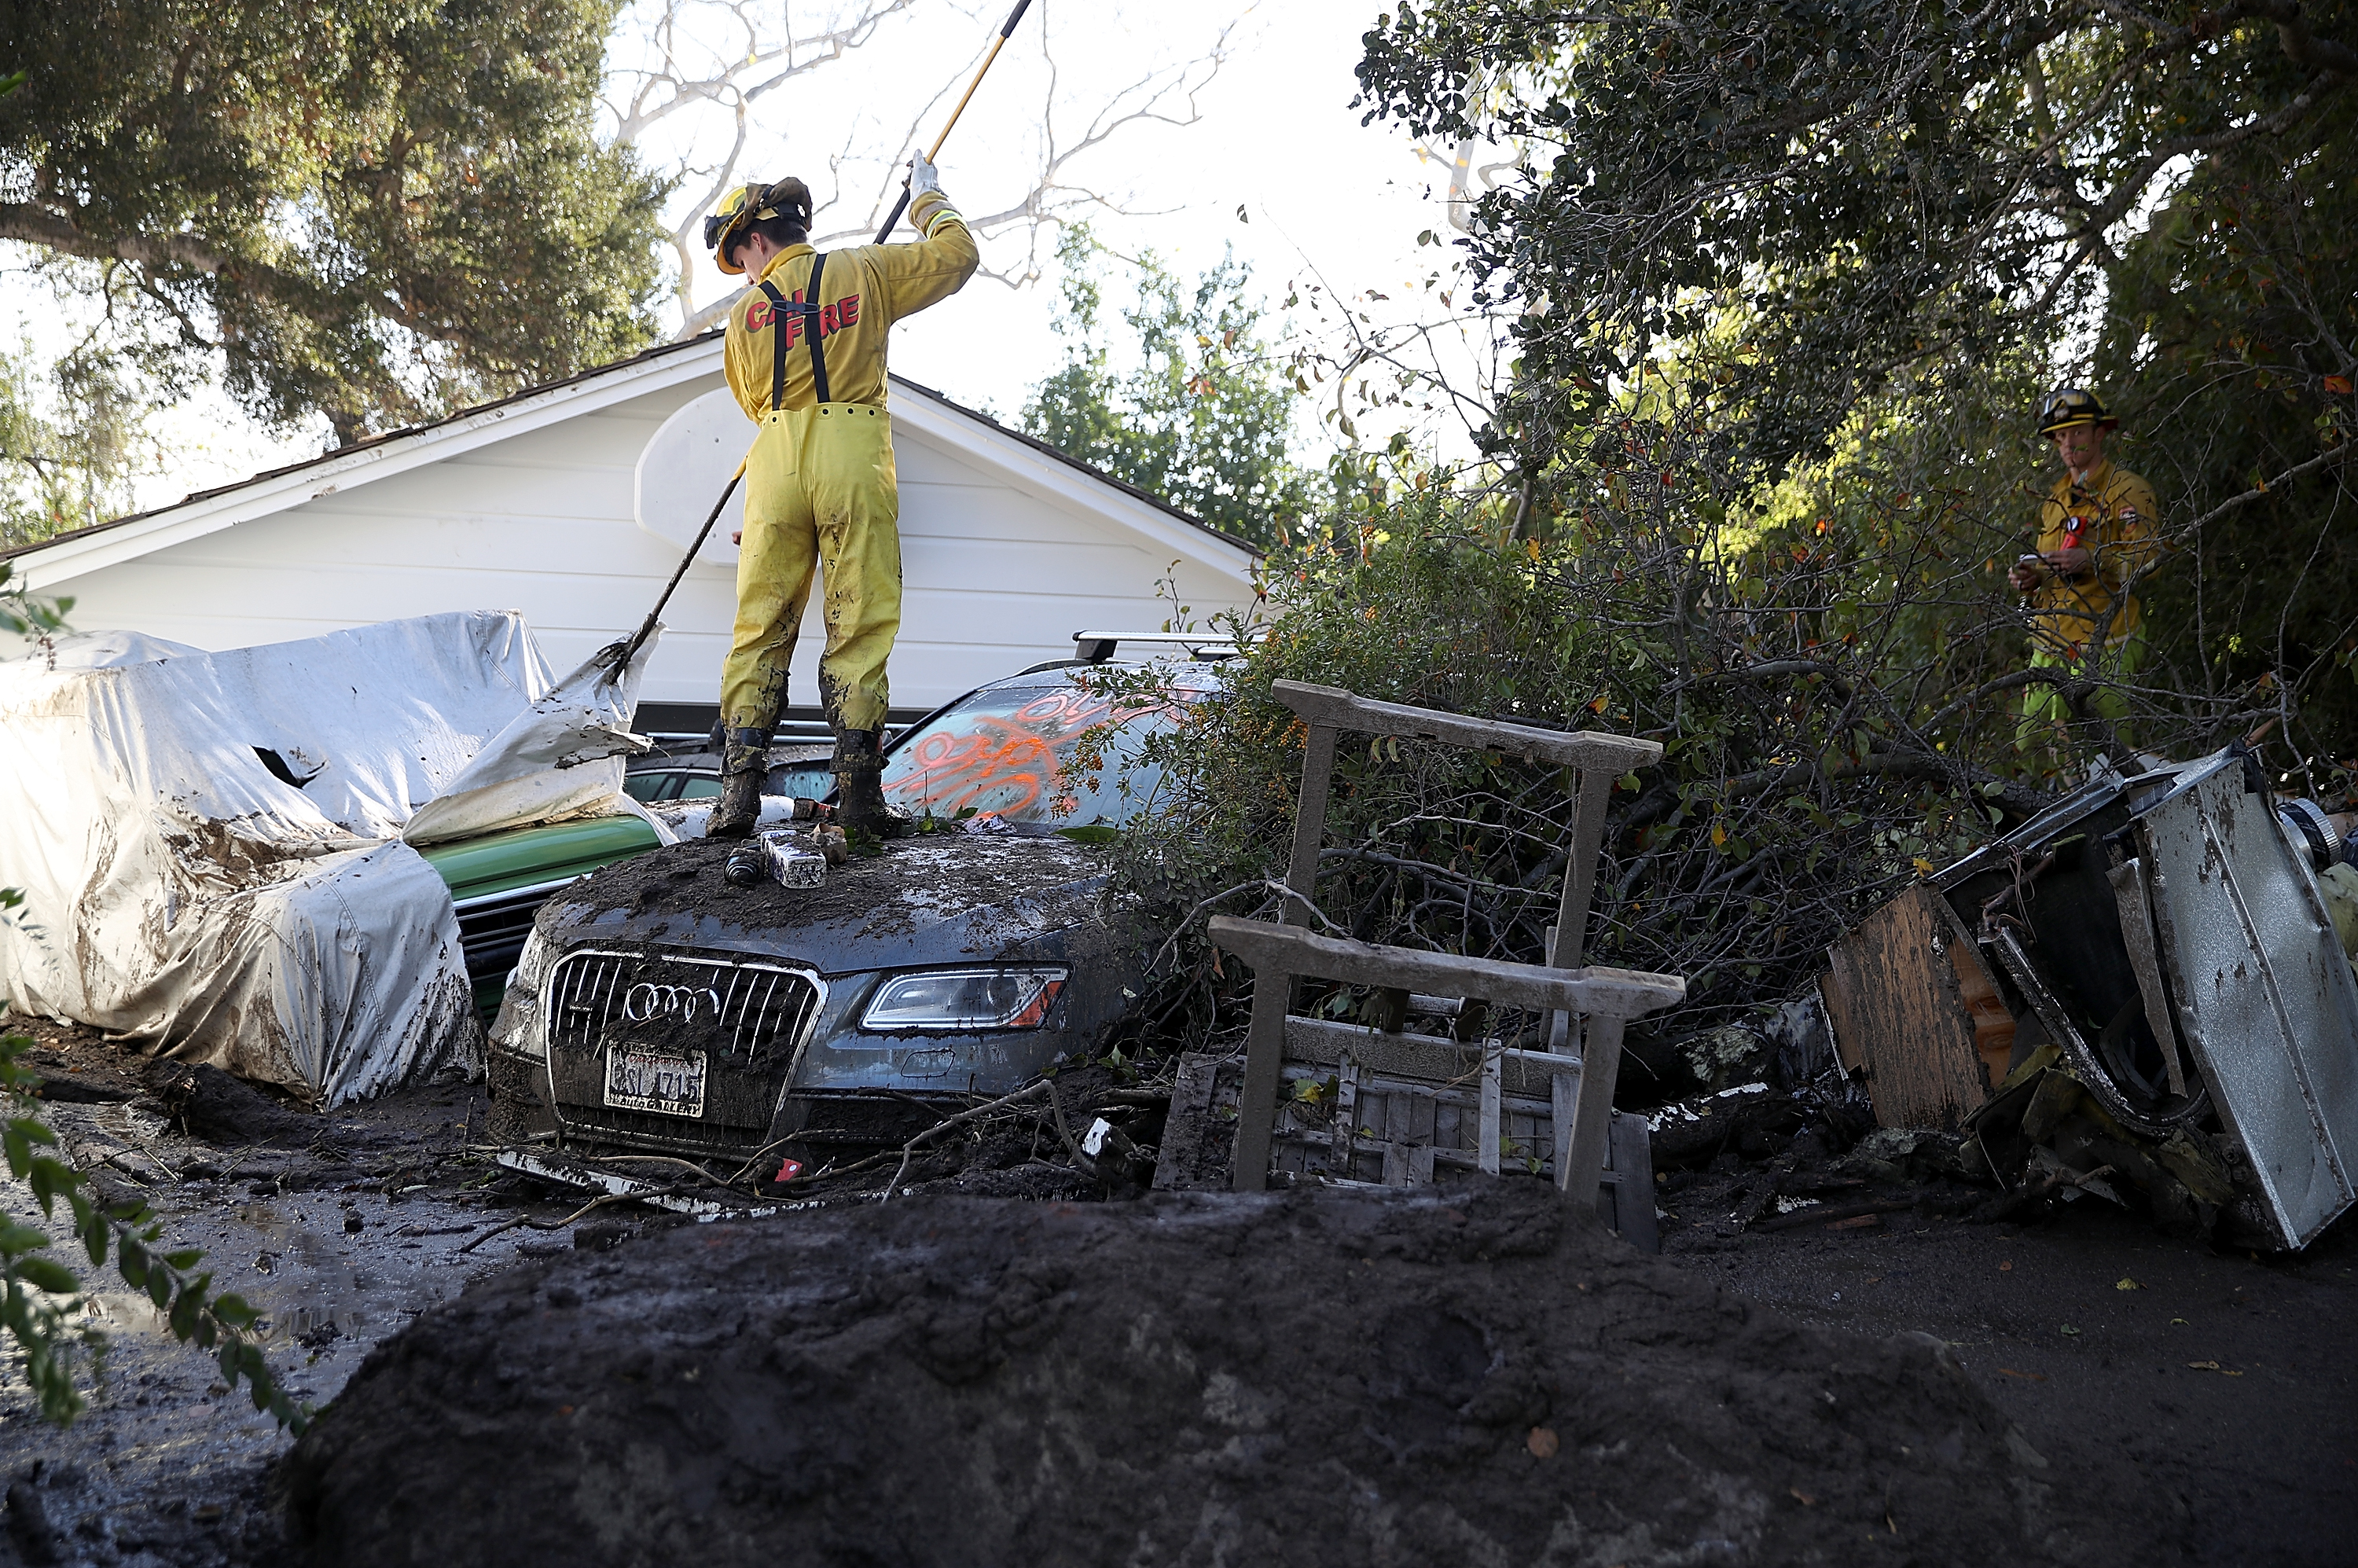 Mudslides Kill At Least 17 People In Santa Barbara County Where Wildfire Scorched Hillside